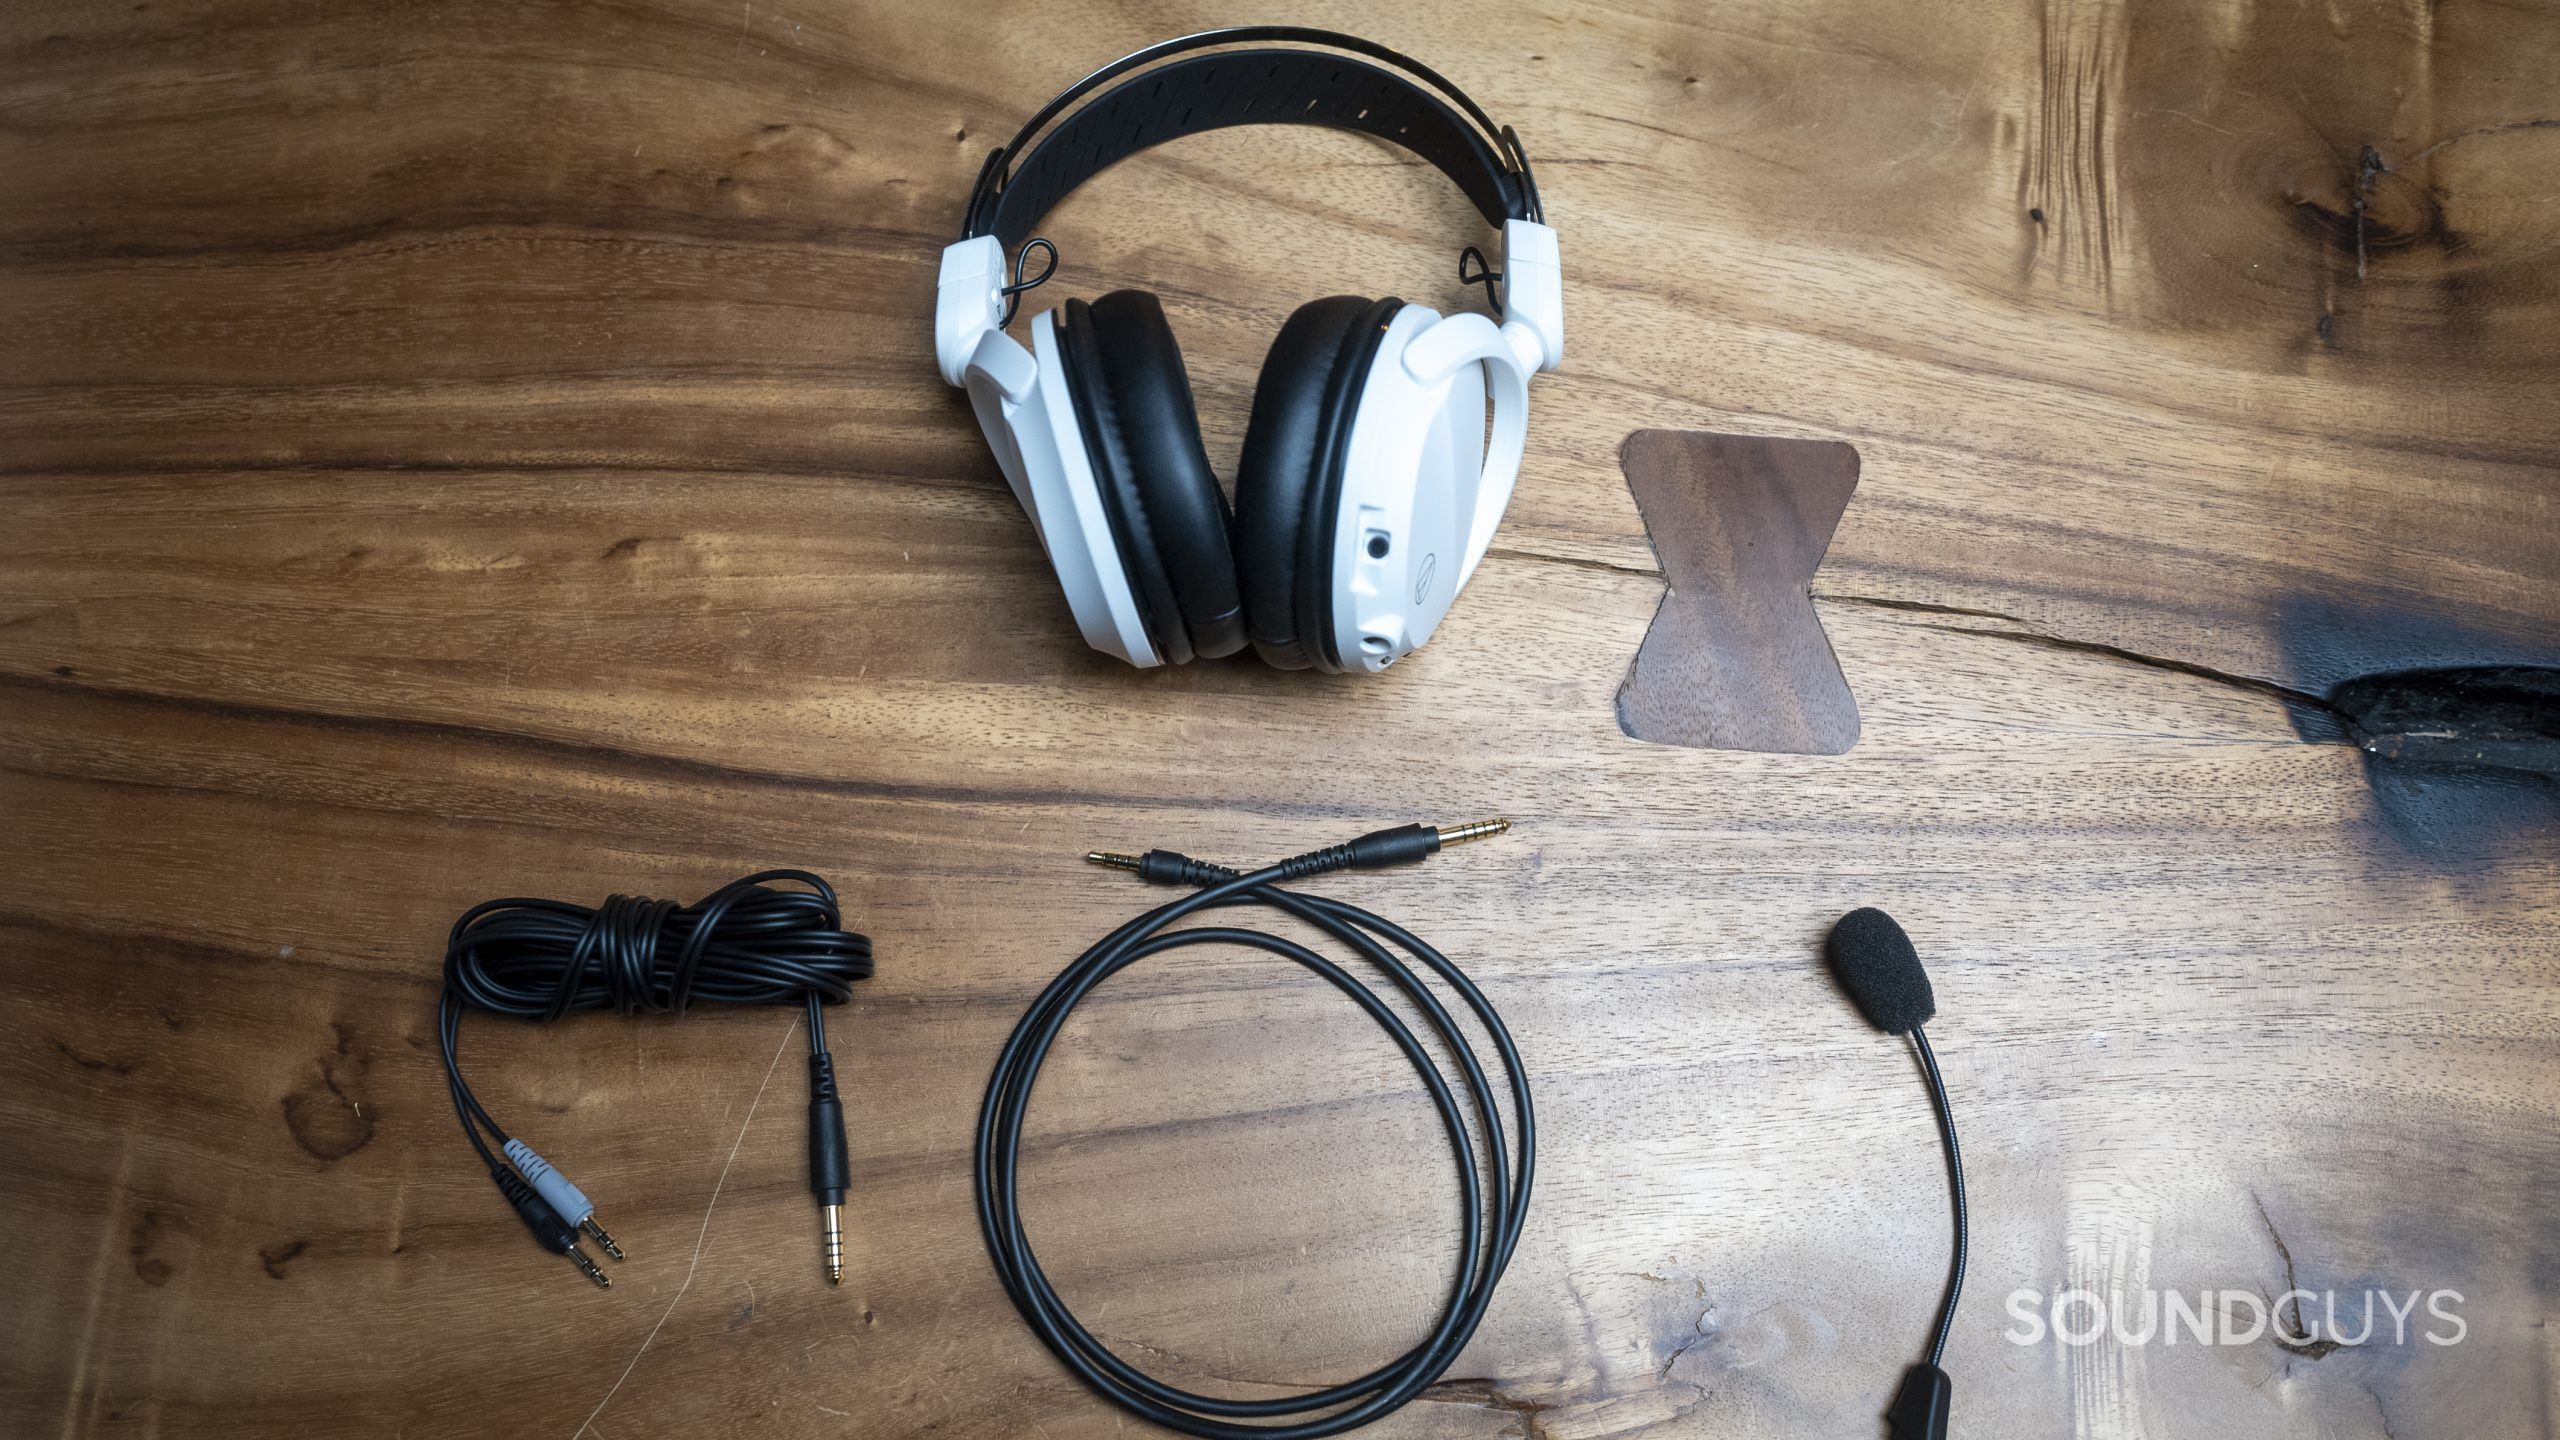 The Audio-Technica ATH-GL3 gaming headset accessories flat against a wood table.